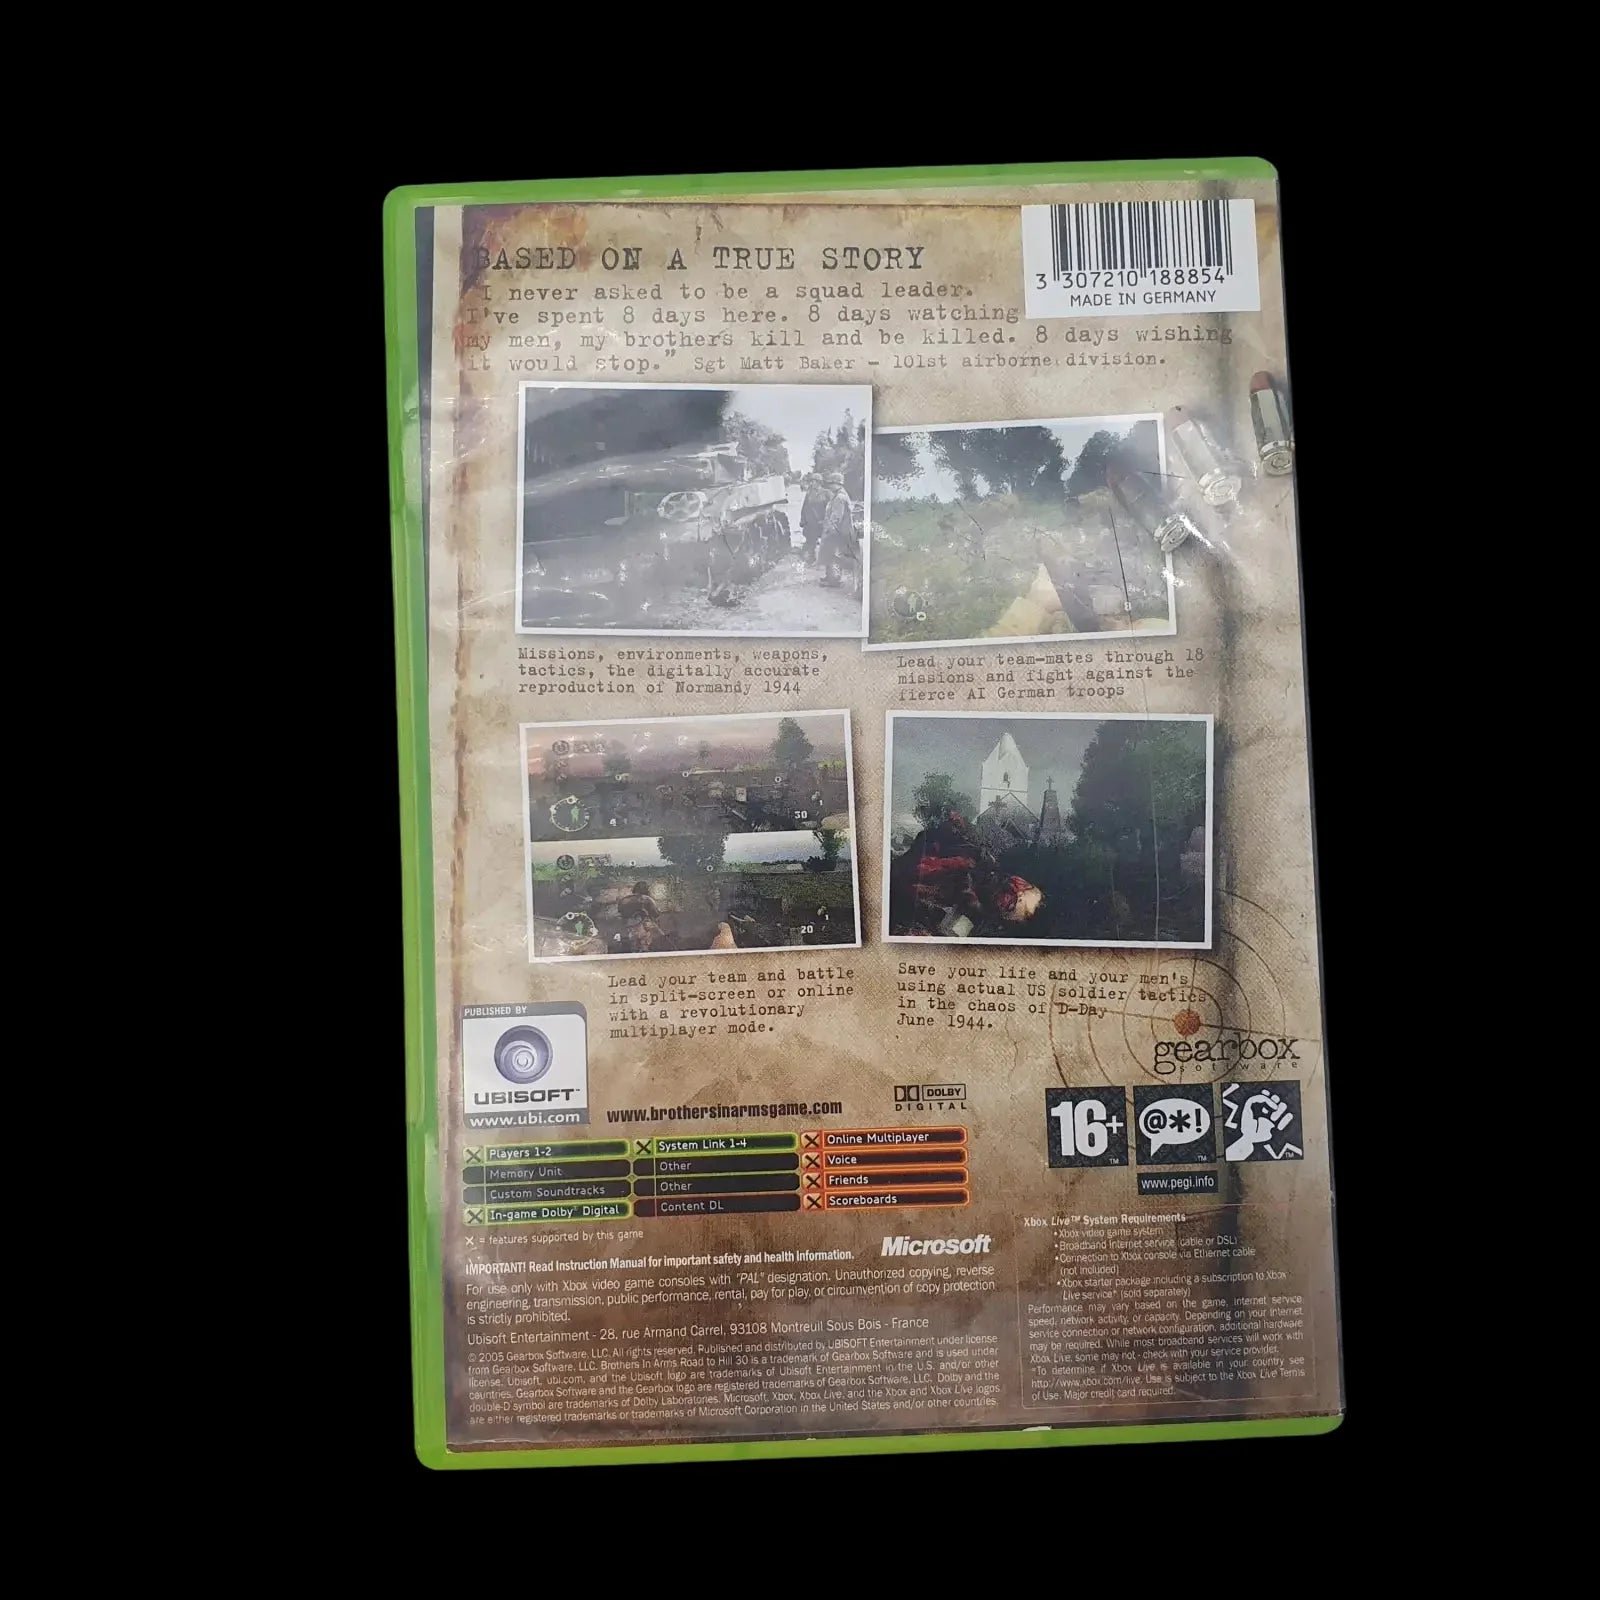 Brothers In Arms Road To Hill 30 Xbox Original Ubisoft 2005